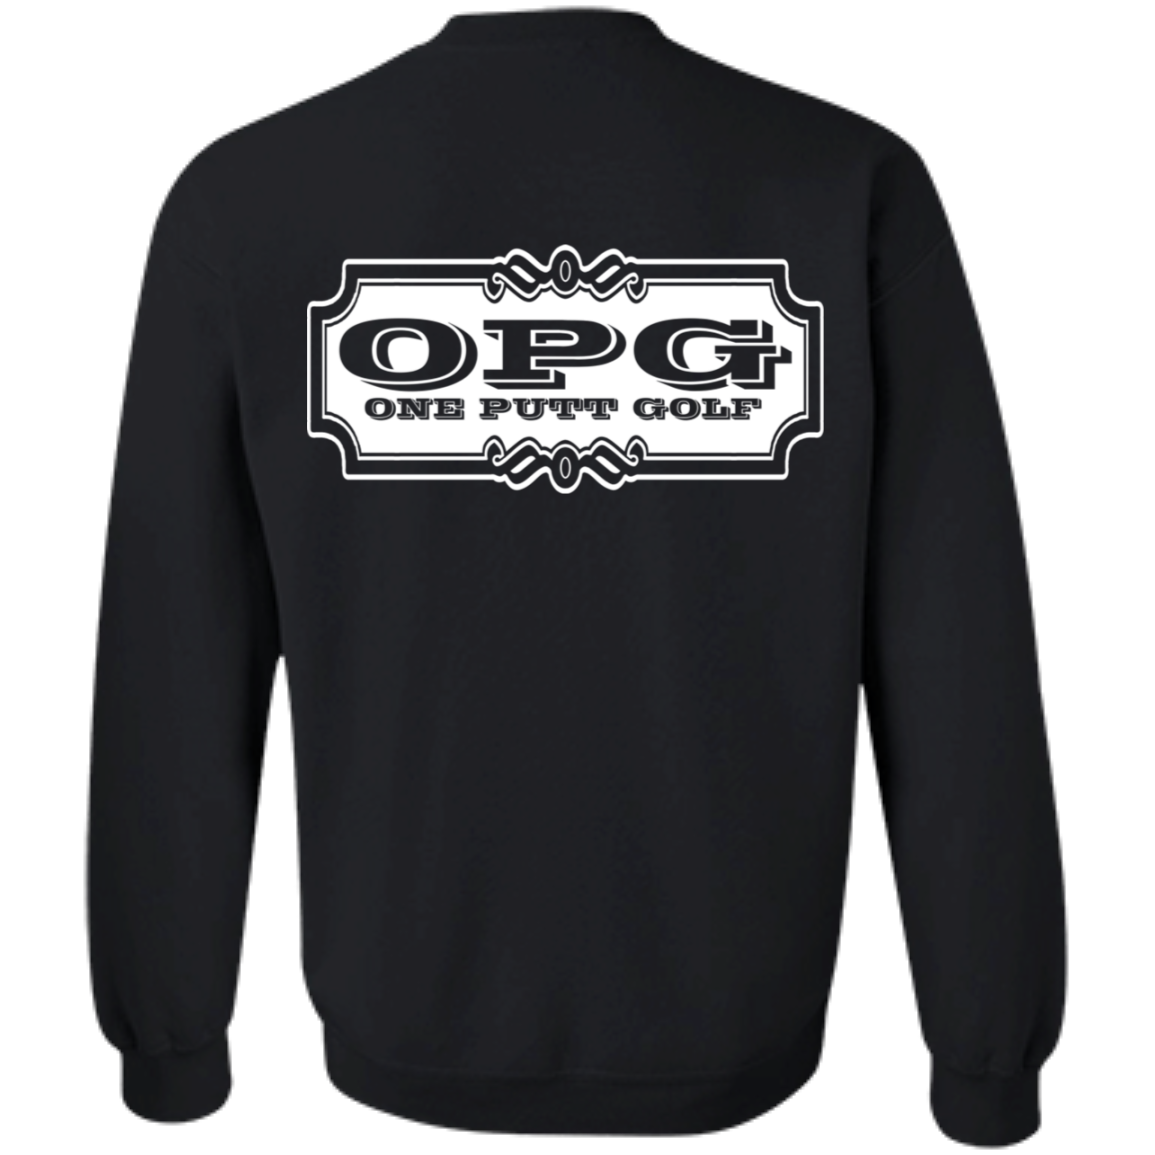 OPG Custom Design #7. Father and Son's First Beer. Don't Tell Your Mother. Crewneck Pullover Sweatshirt